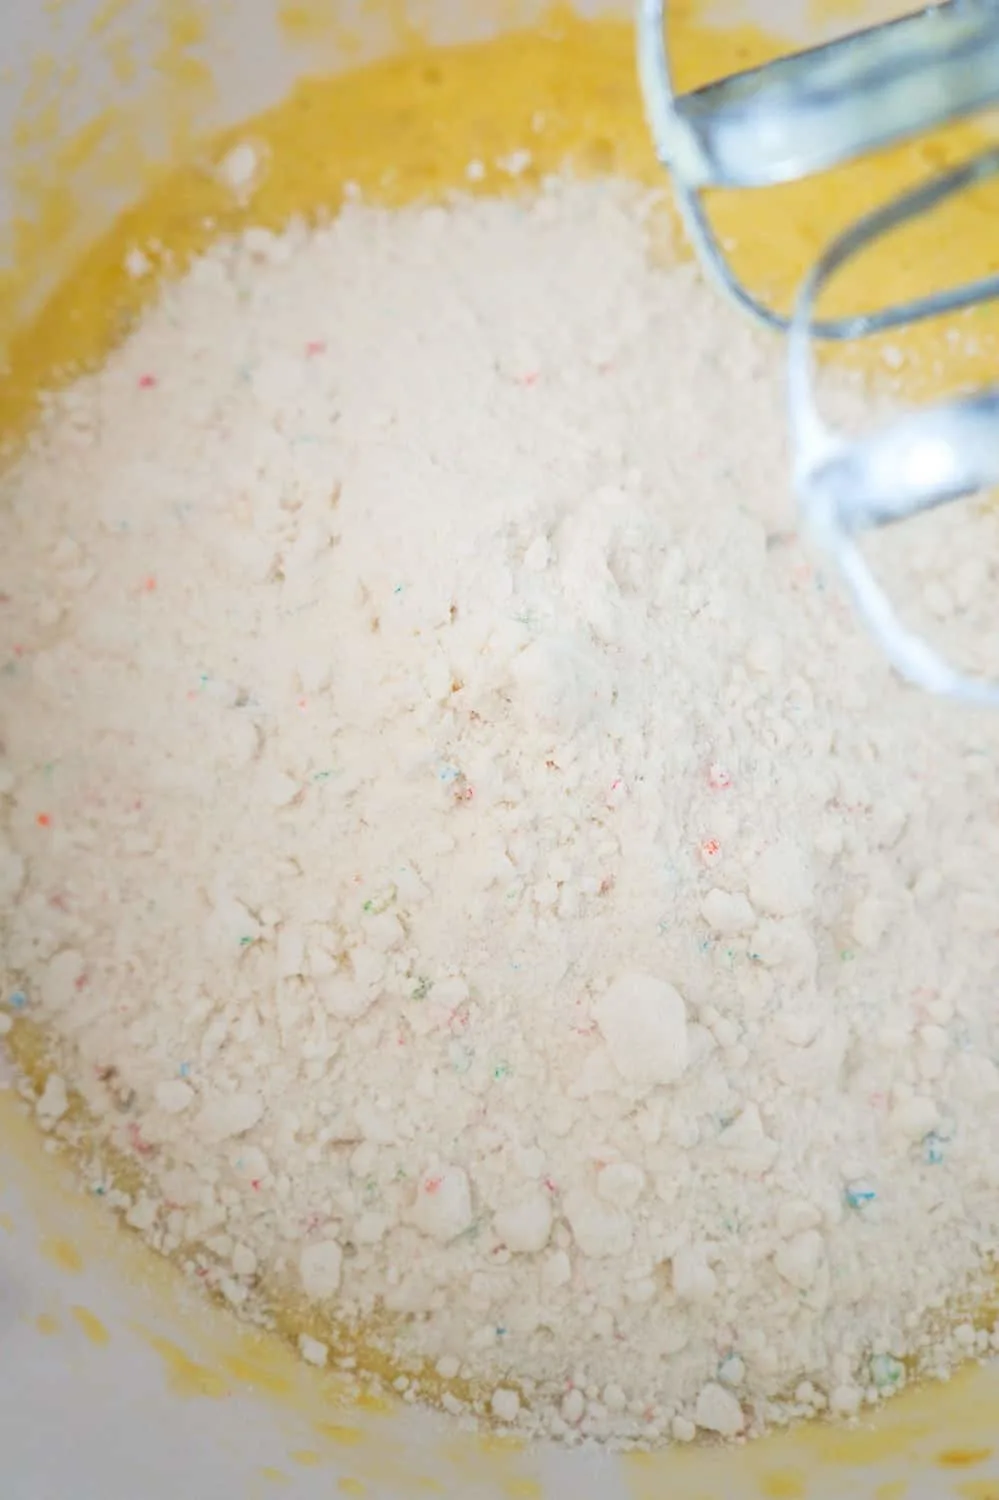 confetti cake mix added to banana and egg mixture in mixing bowl